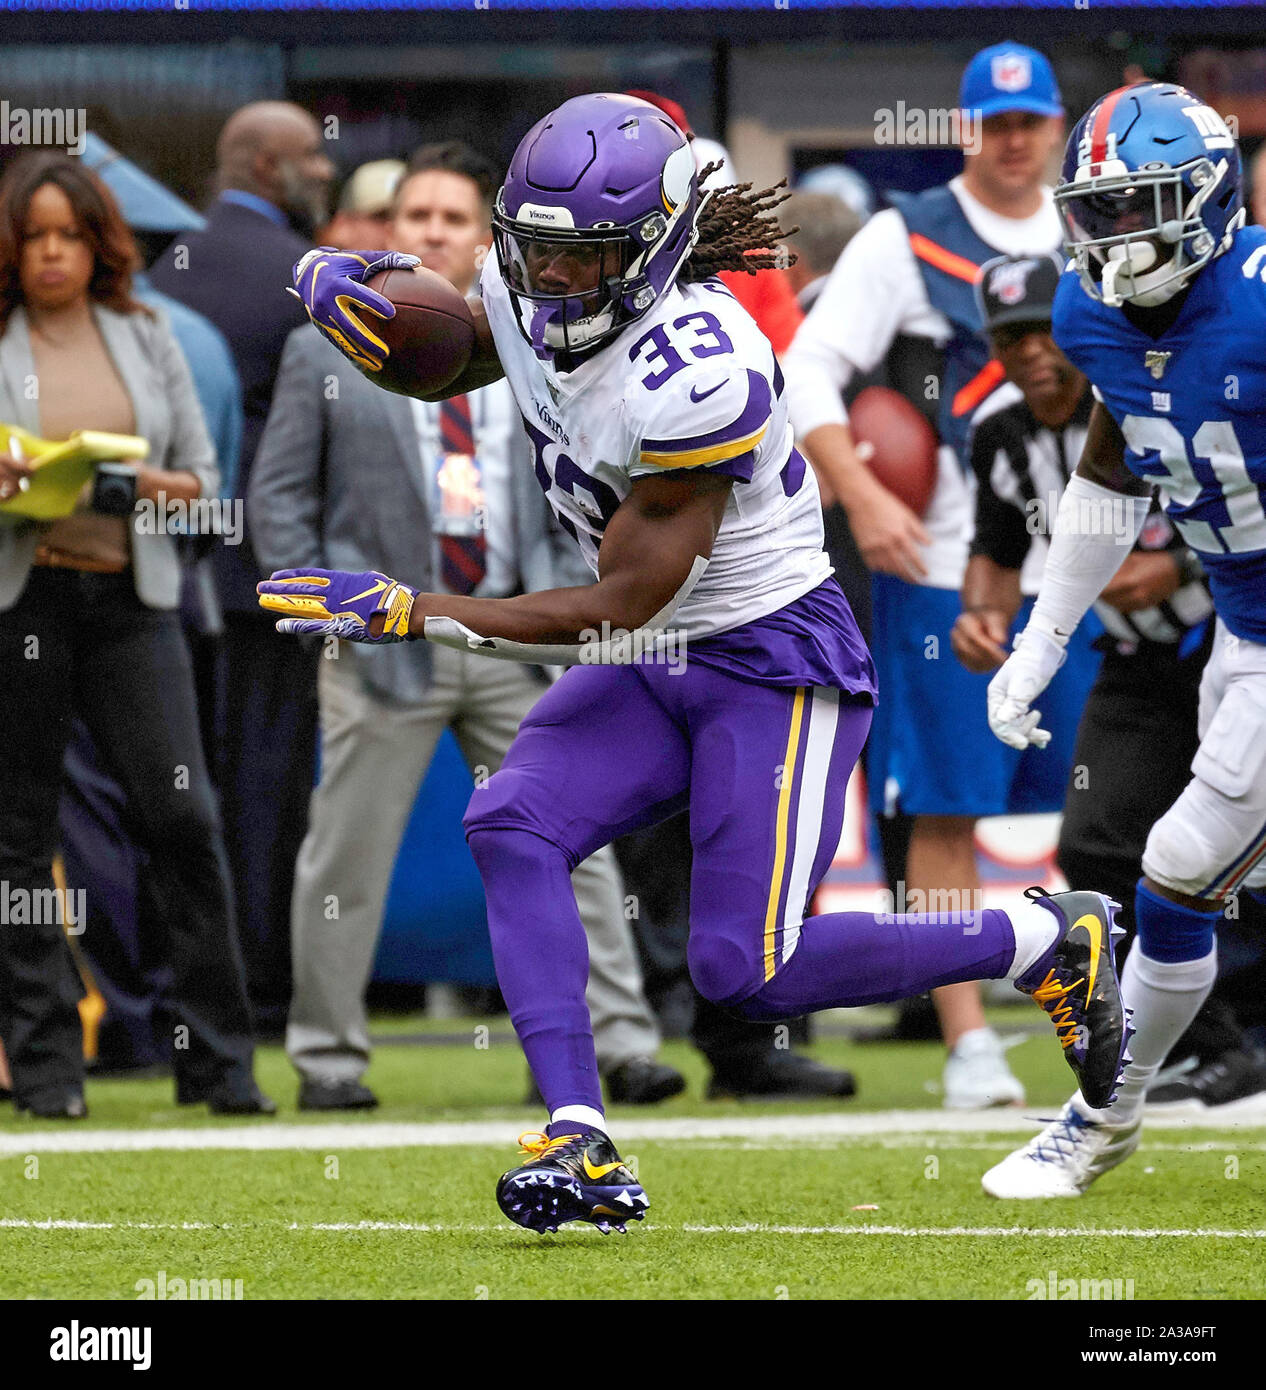 East Rutherford, New Jersey, USA. 6th Oct, 2019. Minnesota Vikings running  back Dalvin Cook (33) looks for running room during a NFL game between the  Minnesota Vikings and the New York Giants